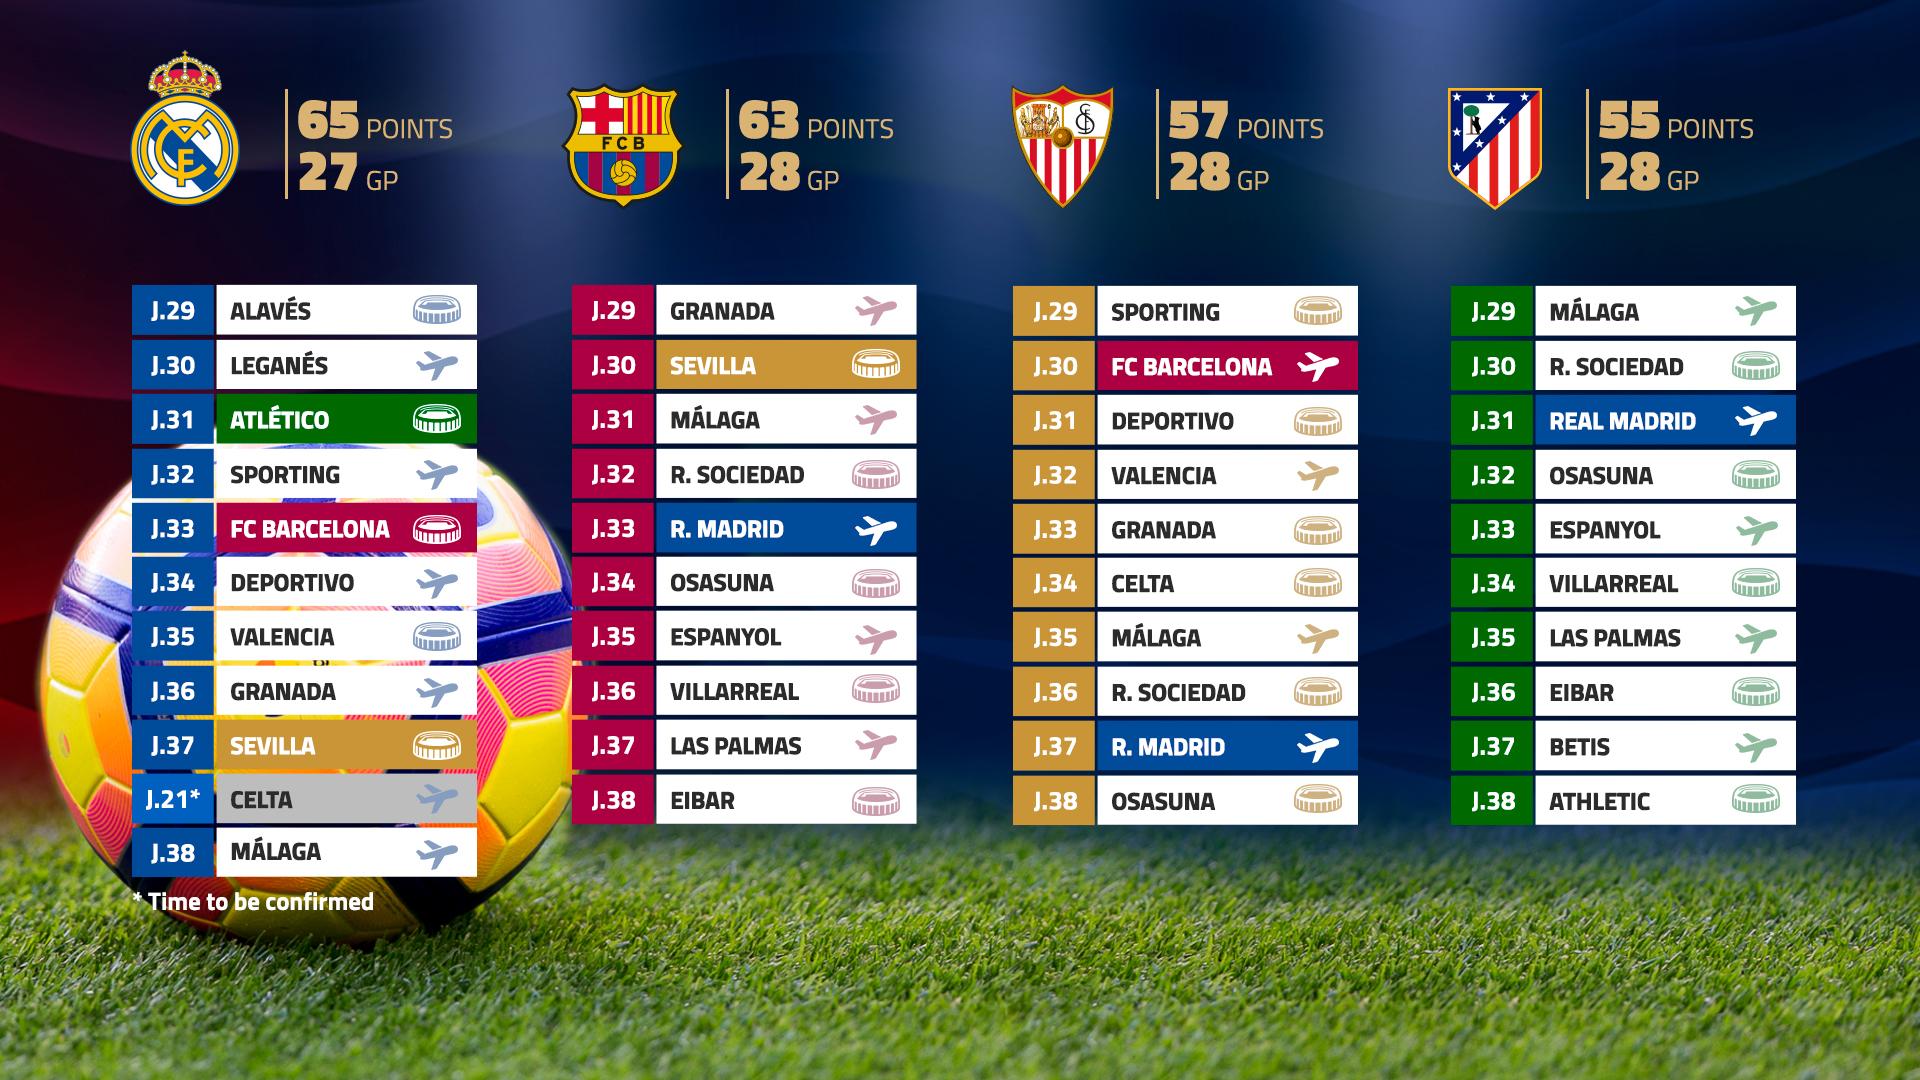 The curious table of which teams travel the furthest in LaLiga